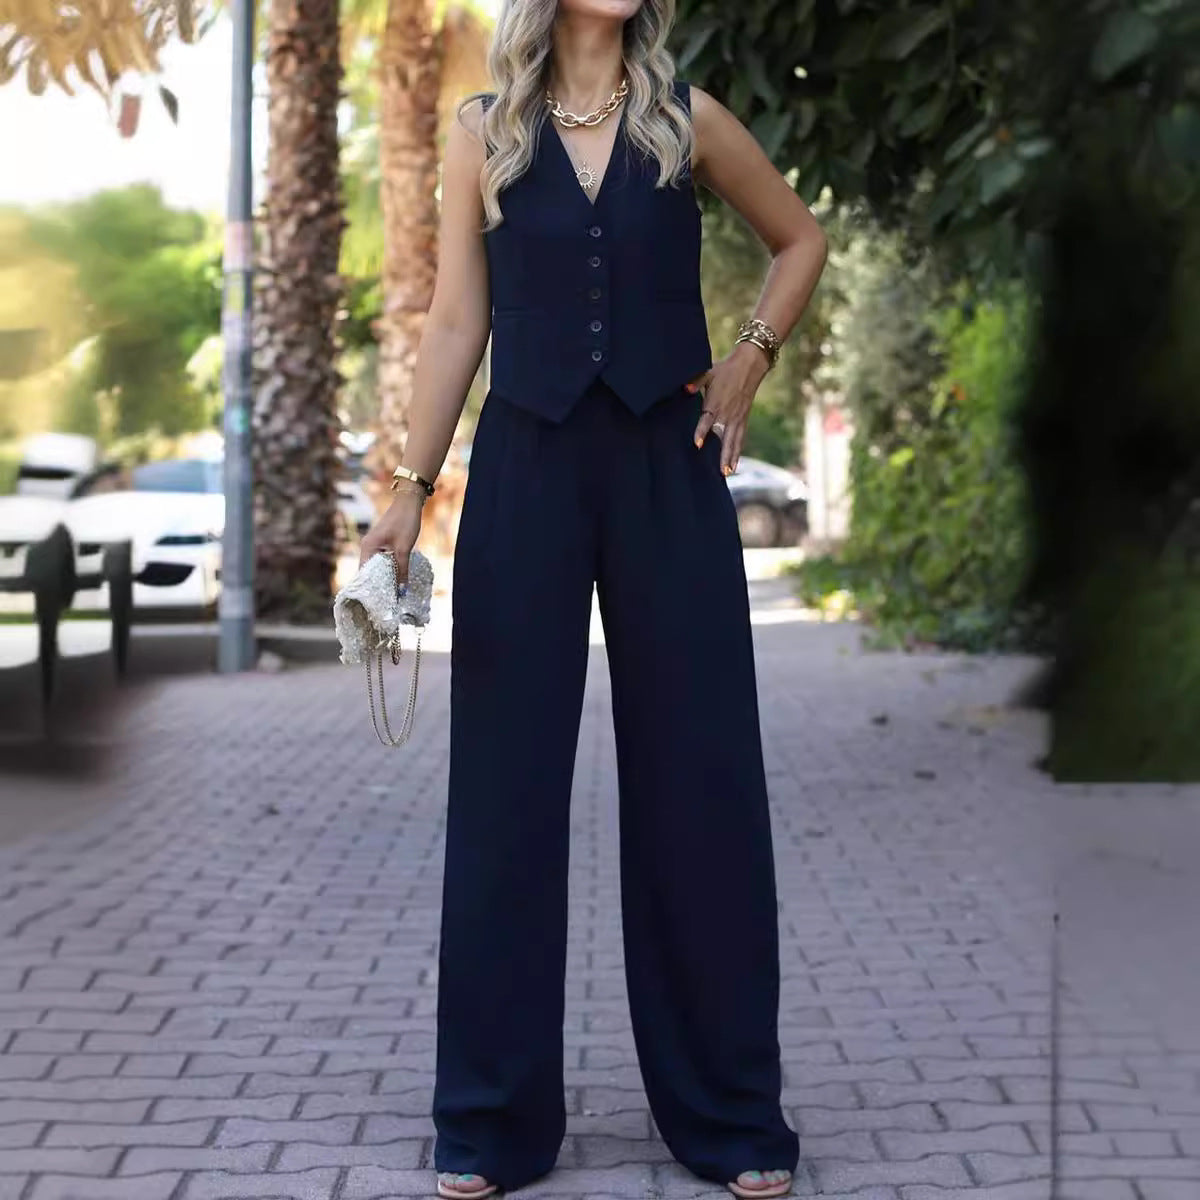 V-Neck Sleeveless Vest and Drooping Wide-Leg Pants Suit